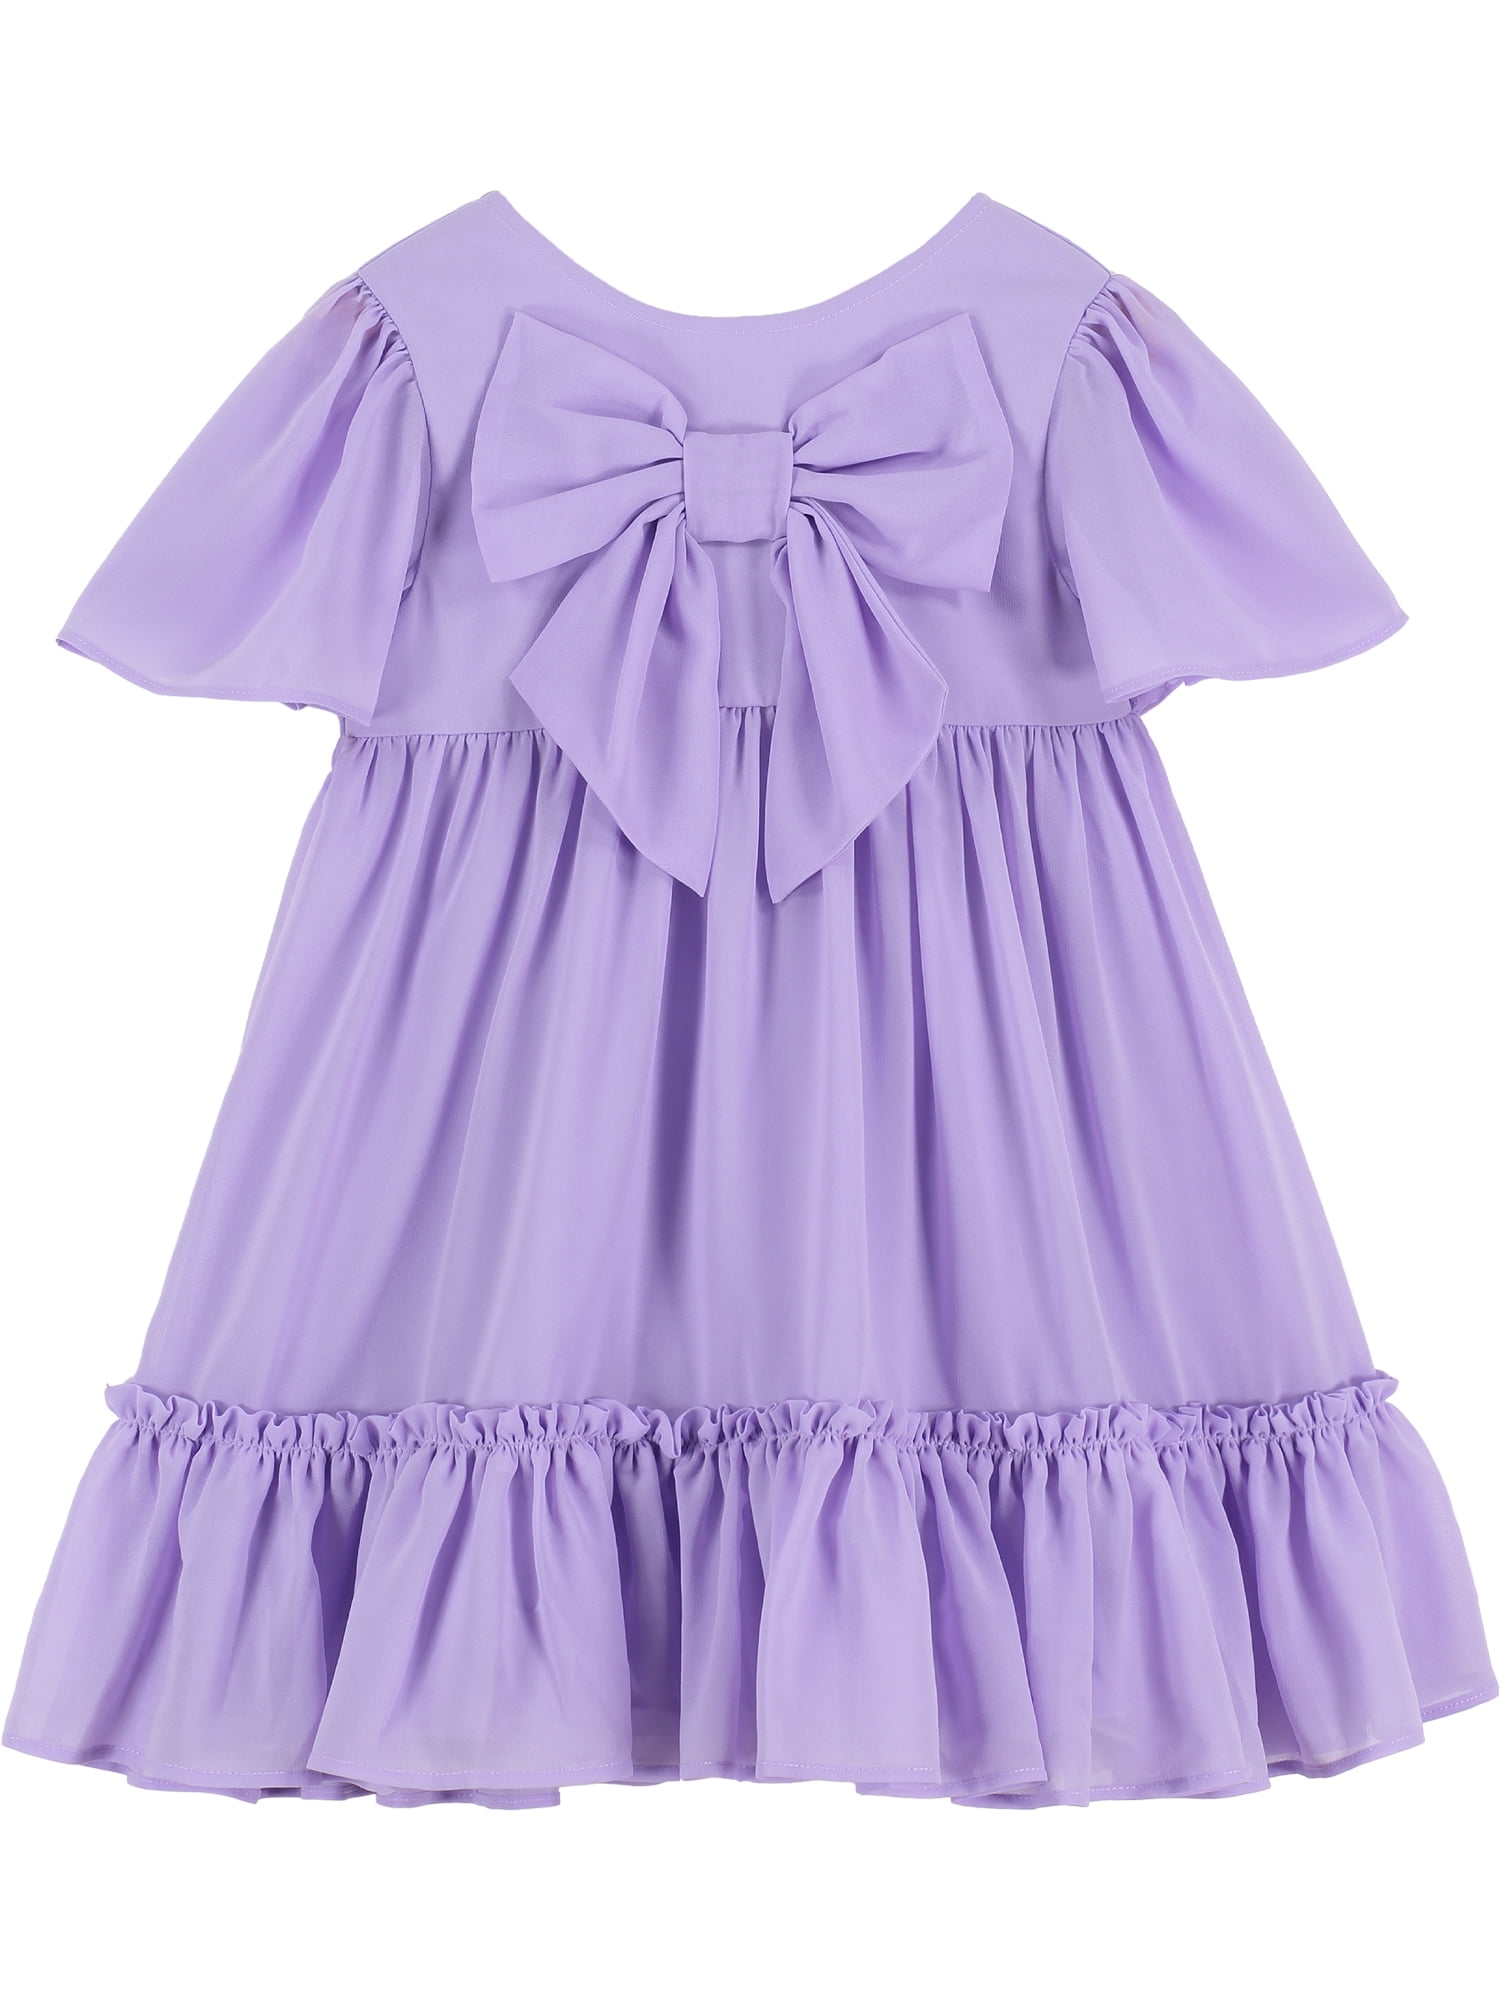 Wonder Nation Baby and Toddler Girl Bow-Front Occasion Dress, Sizes 0-3 Months - 5T